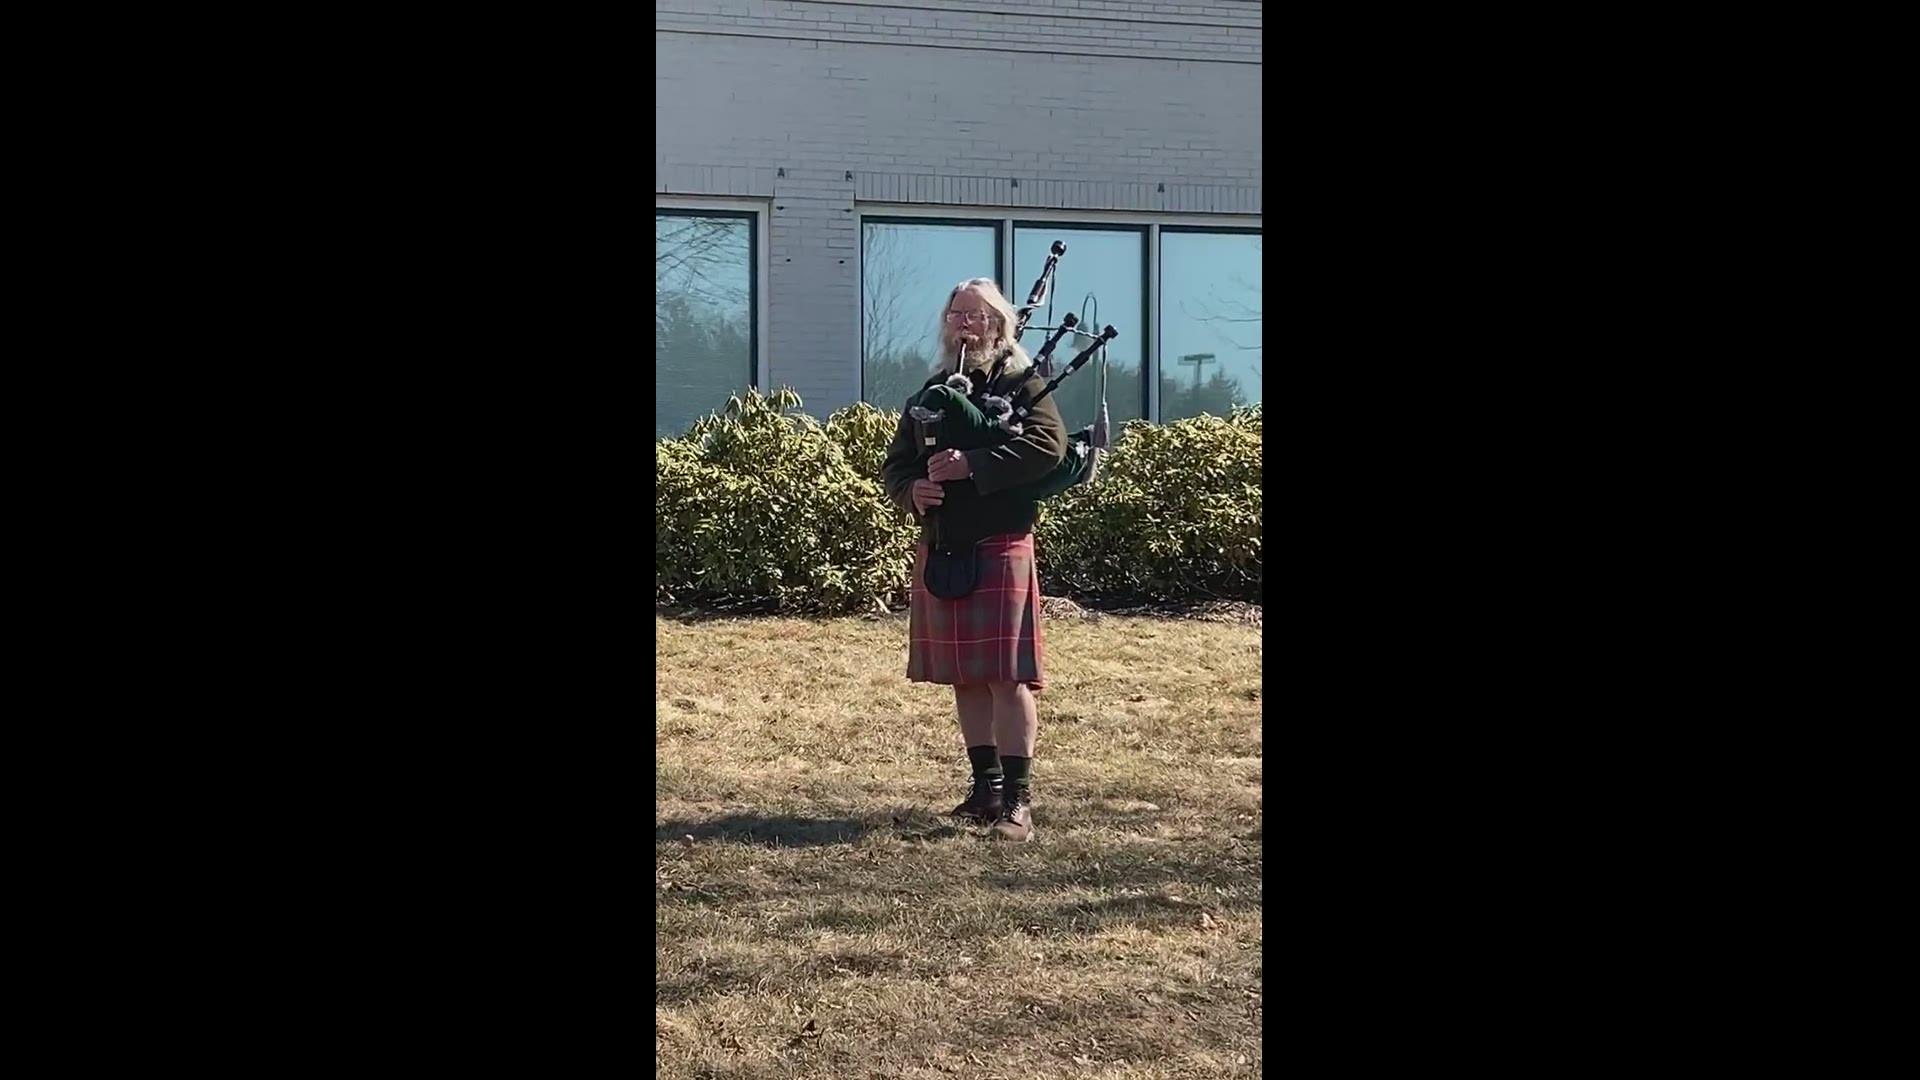 After getting his vaccination, this man played bagpipes while others waited for theirs on St. Patrick’s Day.
Credit: Melinda Bosk